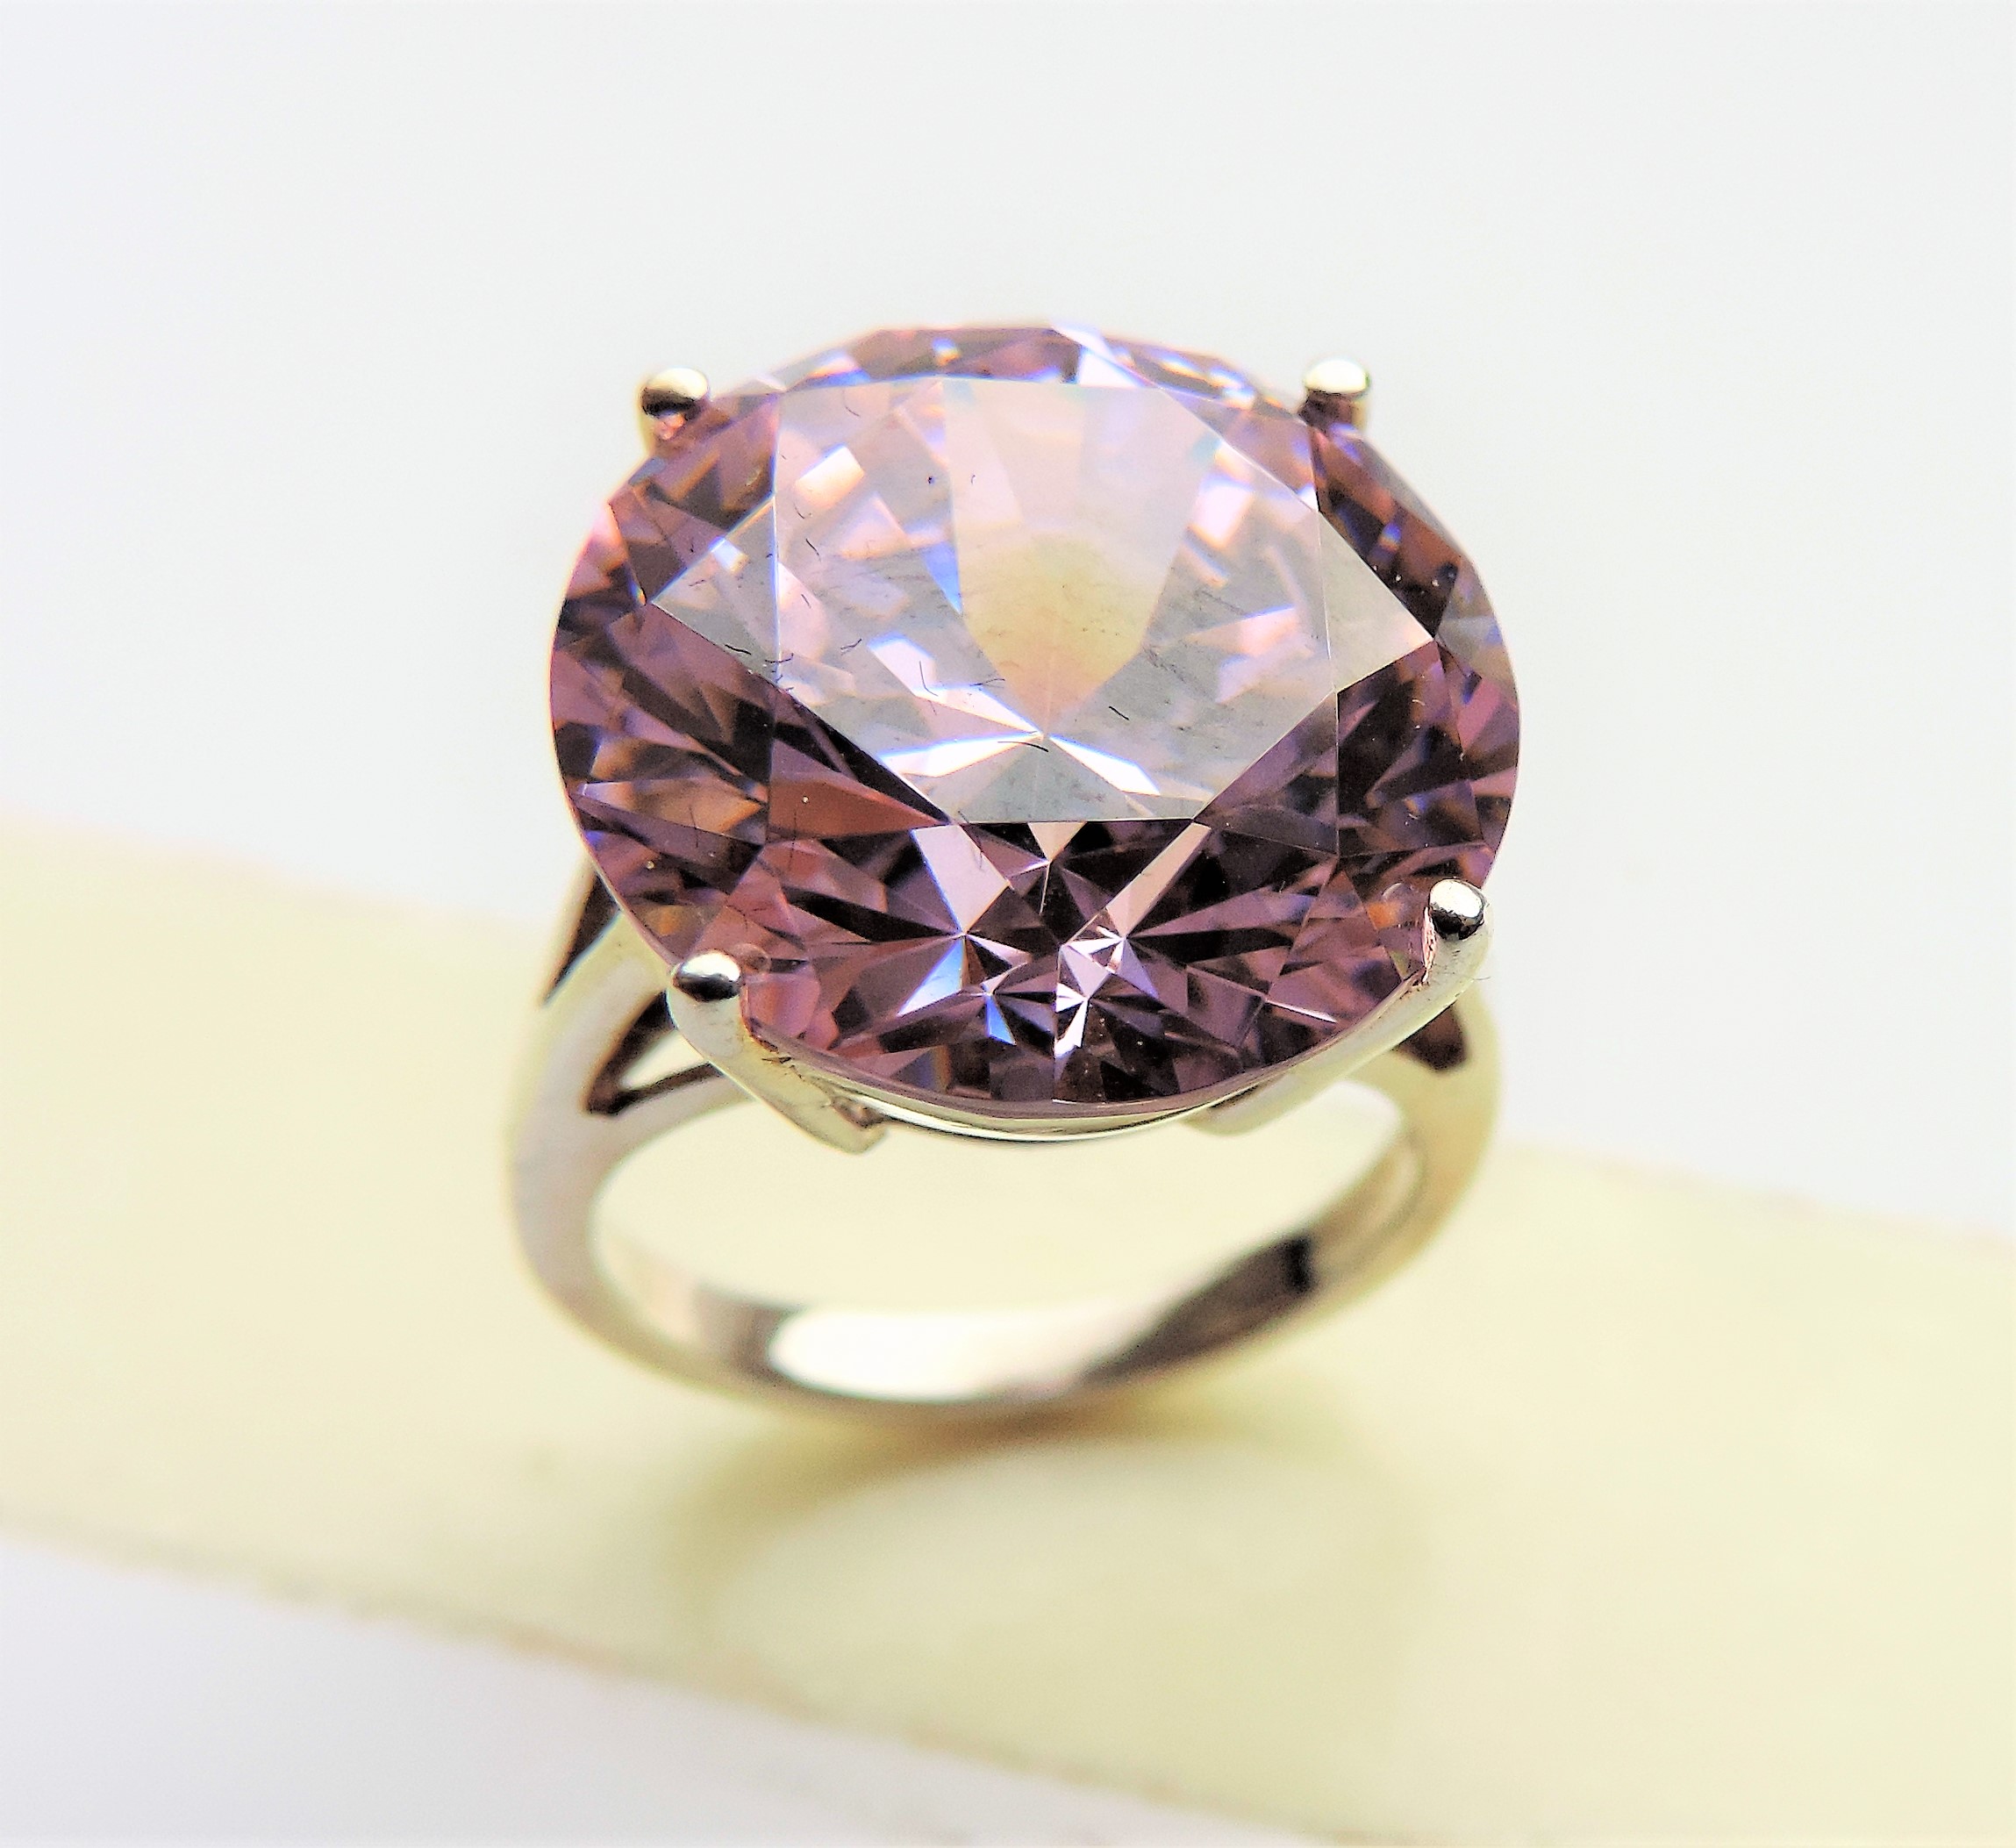 7.75 carat Pink Topaz Ring in Sterling Silver - Image 3 of 3